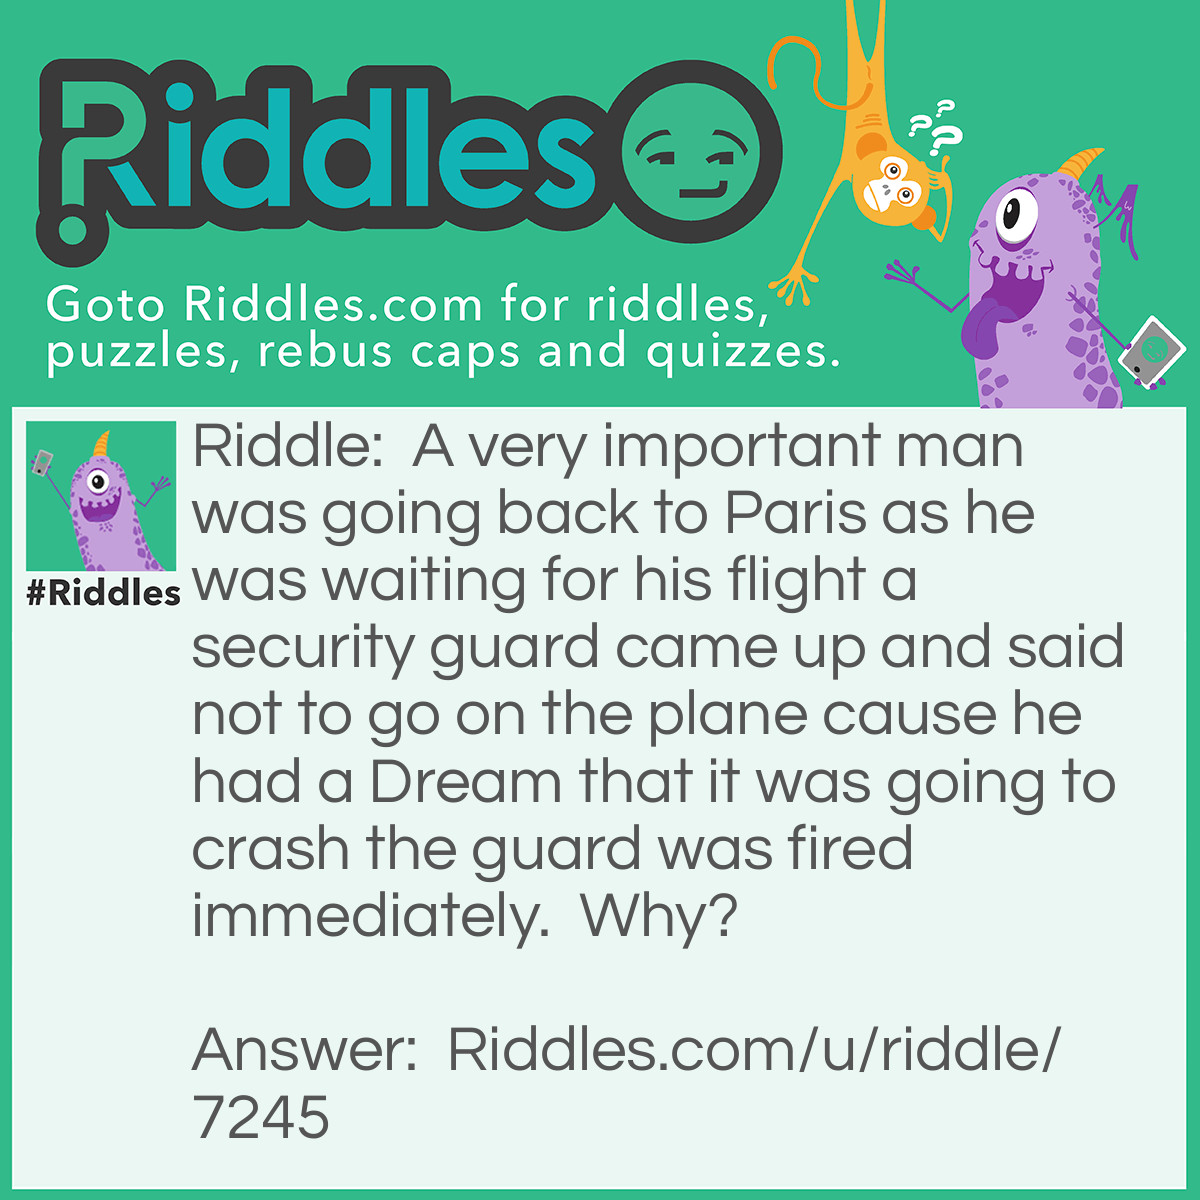 Riddle: A very important man was going back to Paris as he was waiting for his flight a security guard came up and said not to go on the plane cause he had a Dream that it was going to crash the guard was fired immediately.  Why? Answer: He fired the guard cause he was sleeping on the job.